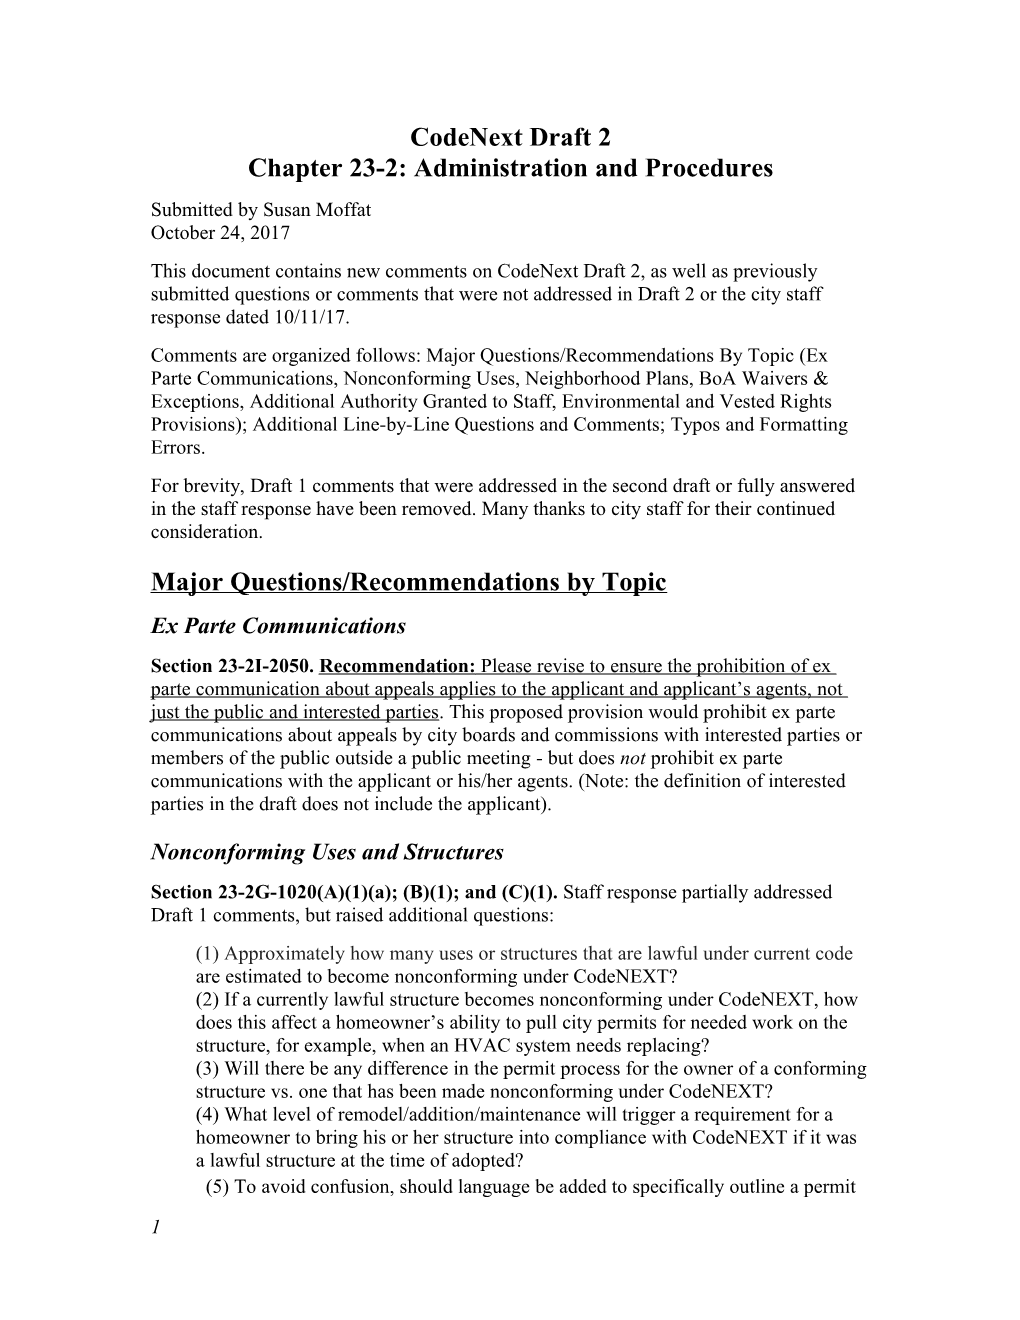 Chapter 23-2: Administration and Procedures